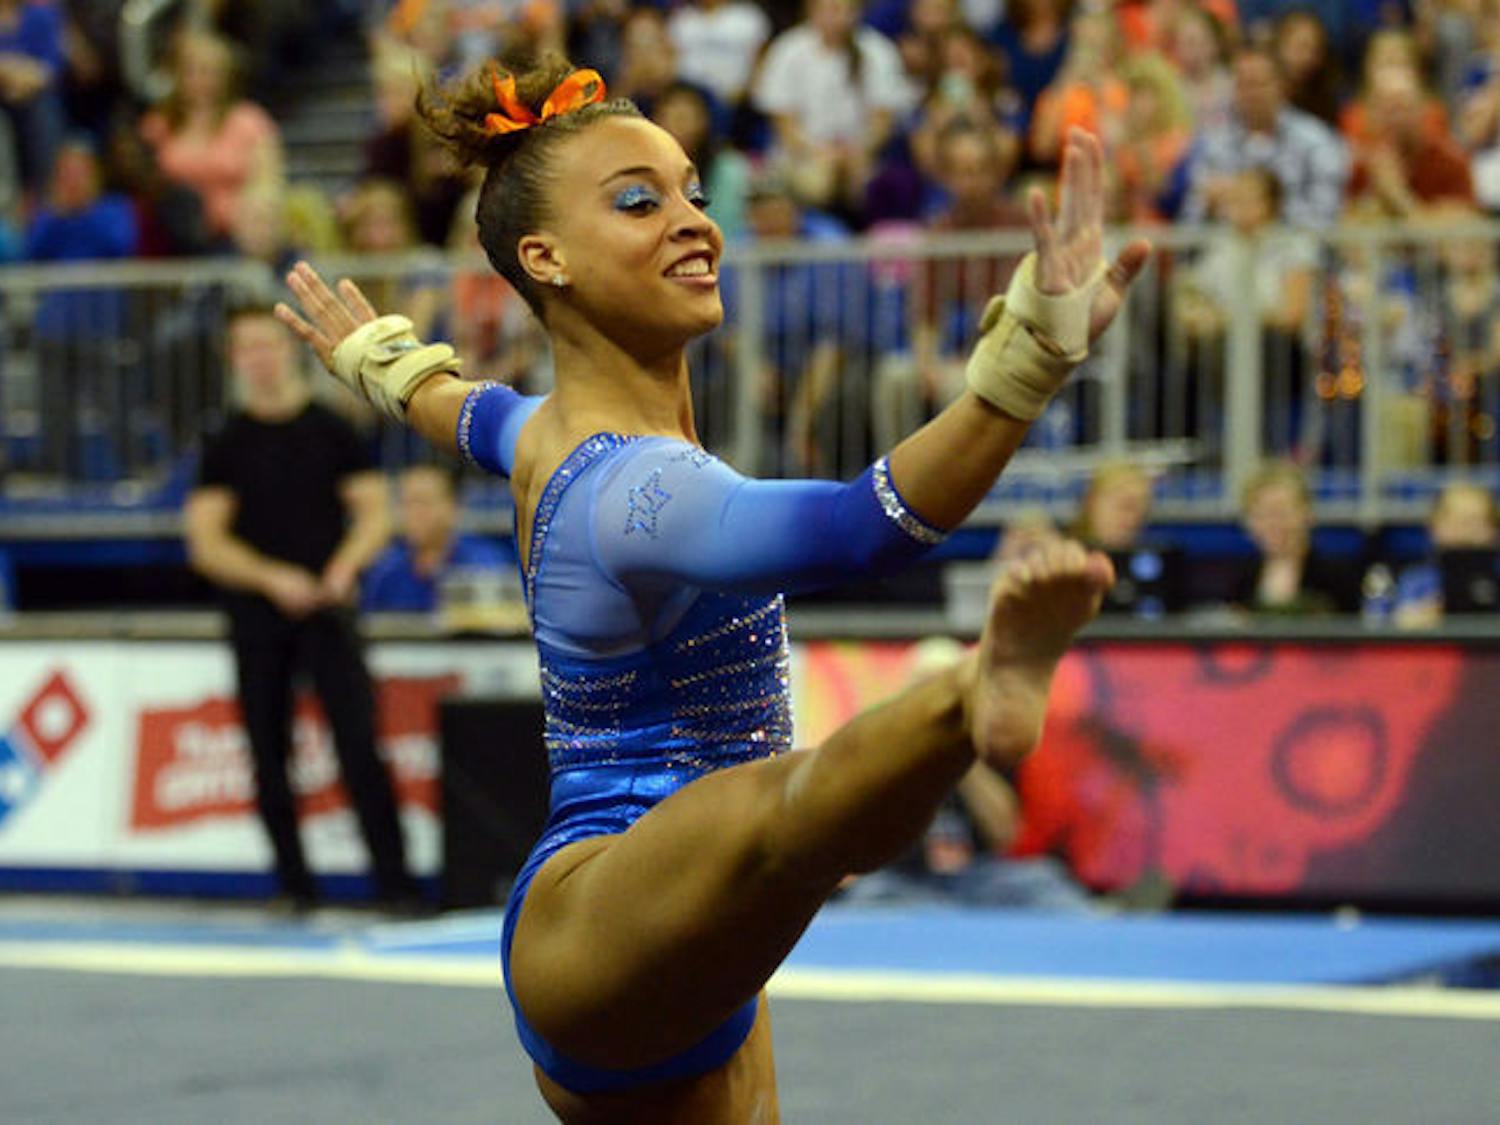 Kytra Hunter performs her floor exercise during Florida's 197.60-196.950 win against Georgia on Jan. 30 in the O'Connell Center. Hunter was named the 2015 Honda Sports Award&nbsp;recipient&nbsp;for gymnastics on Friday.